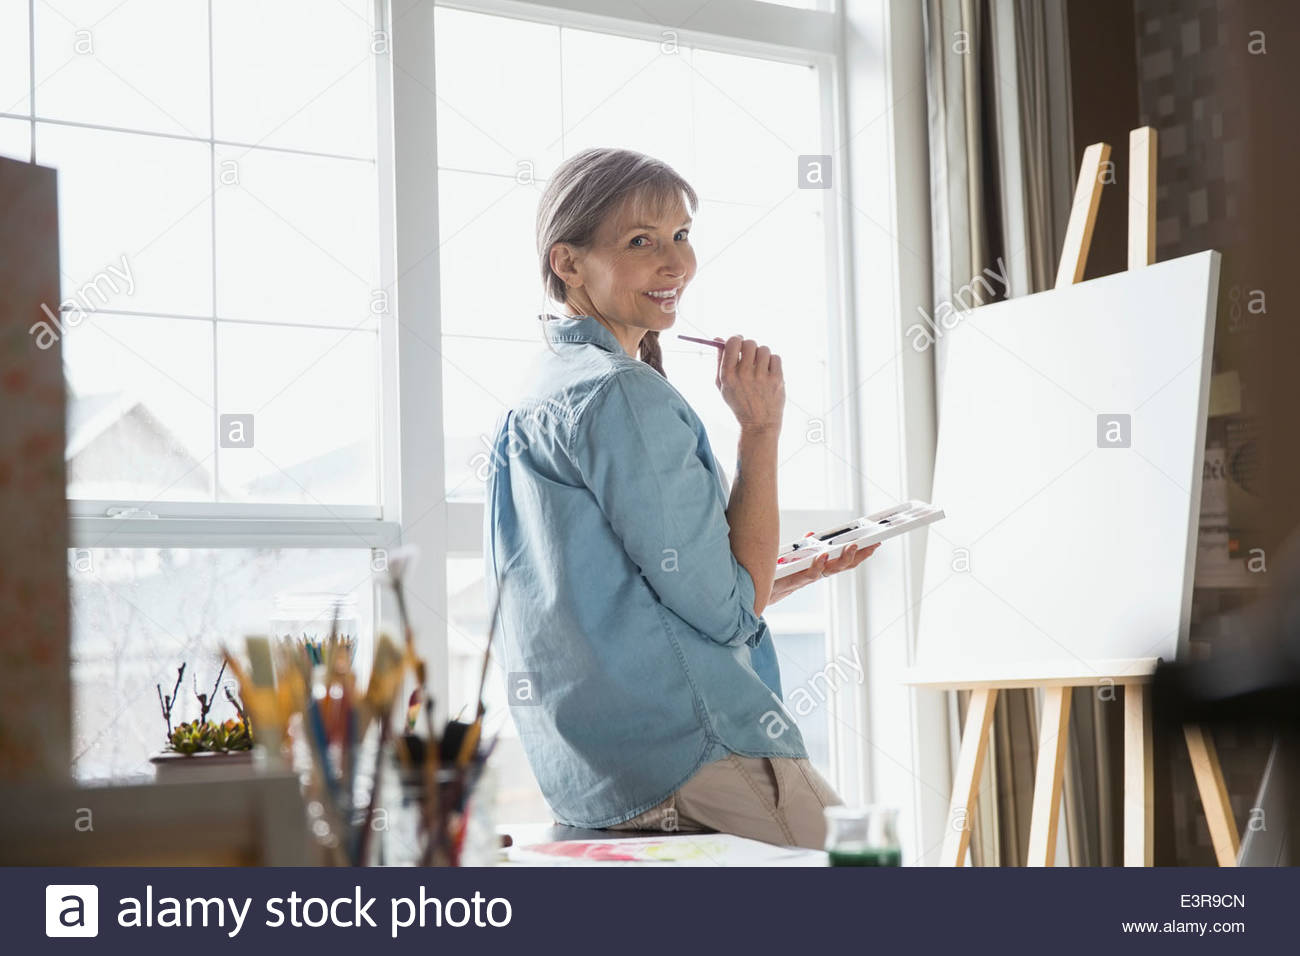 Portrait of woman painting at easel Stock Photo